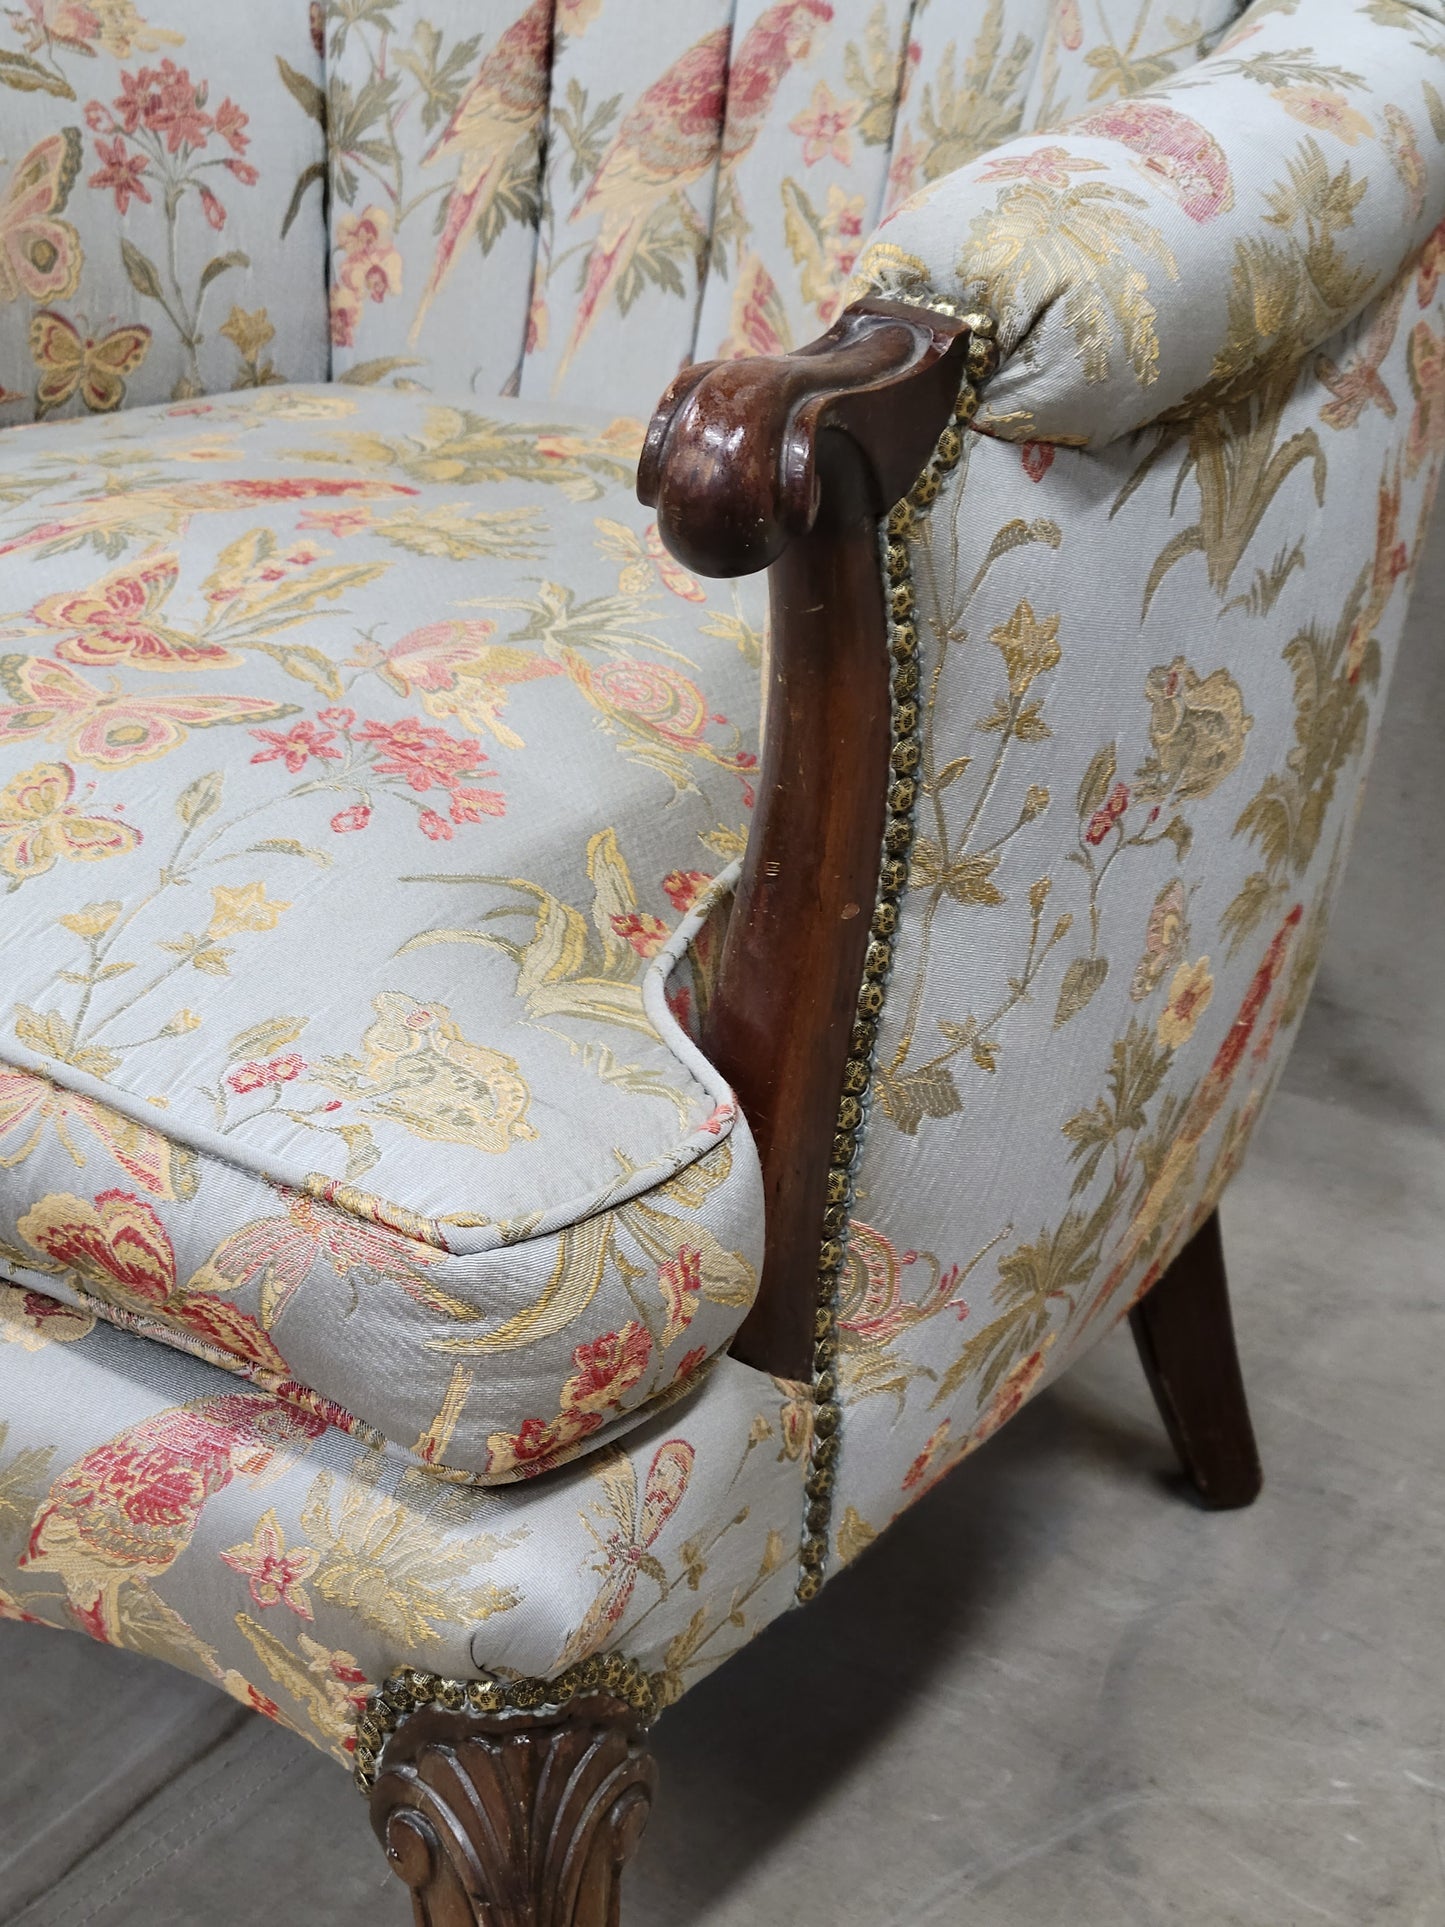 Vintage 1930s Art Deco Fan Back Bergere Chair With Kravet Parrot and Butterfly Damask Fabric